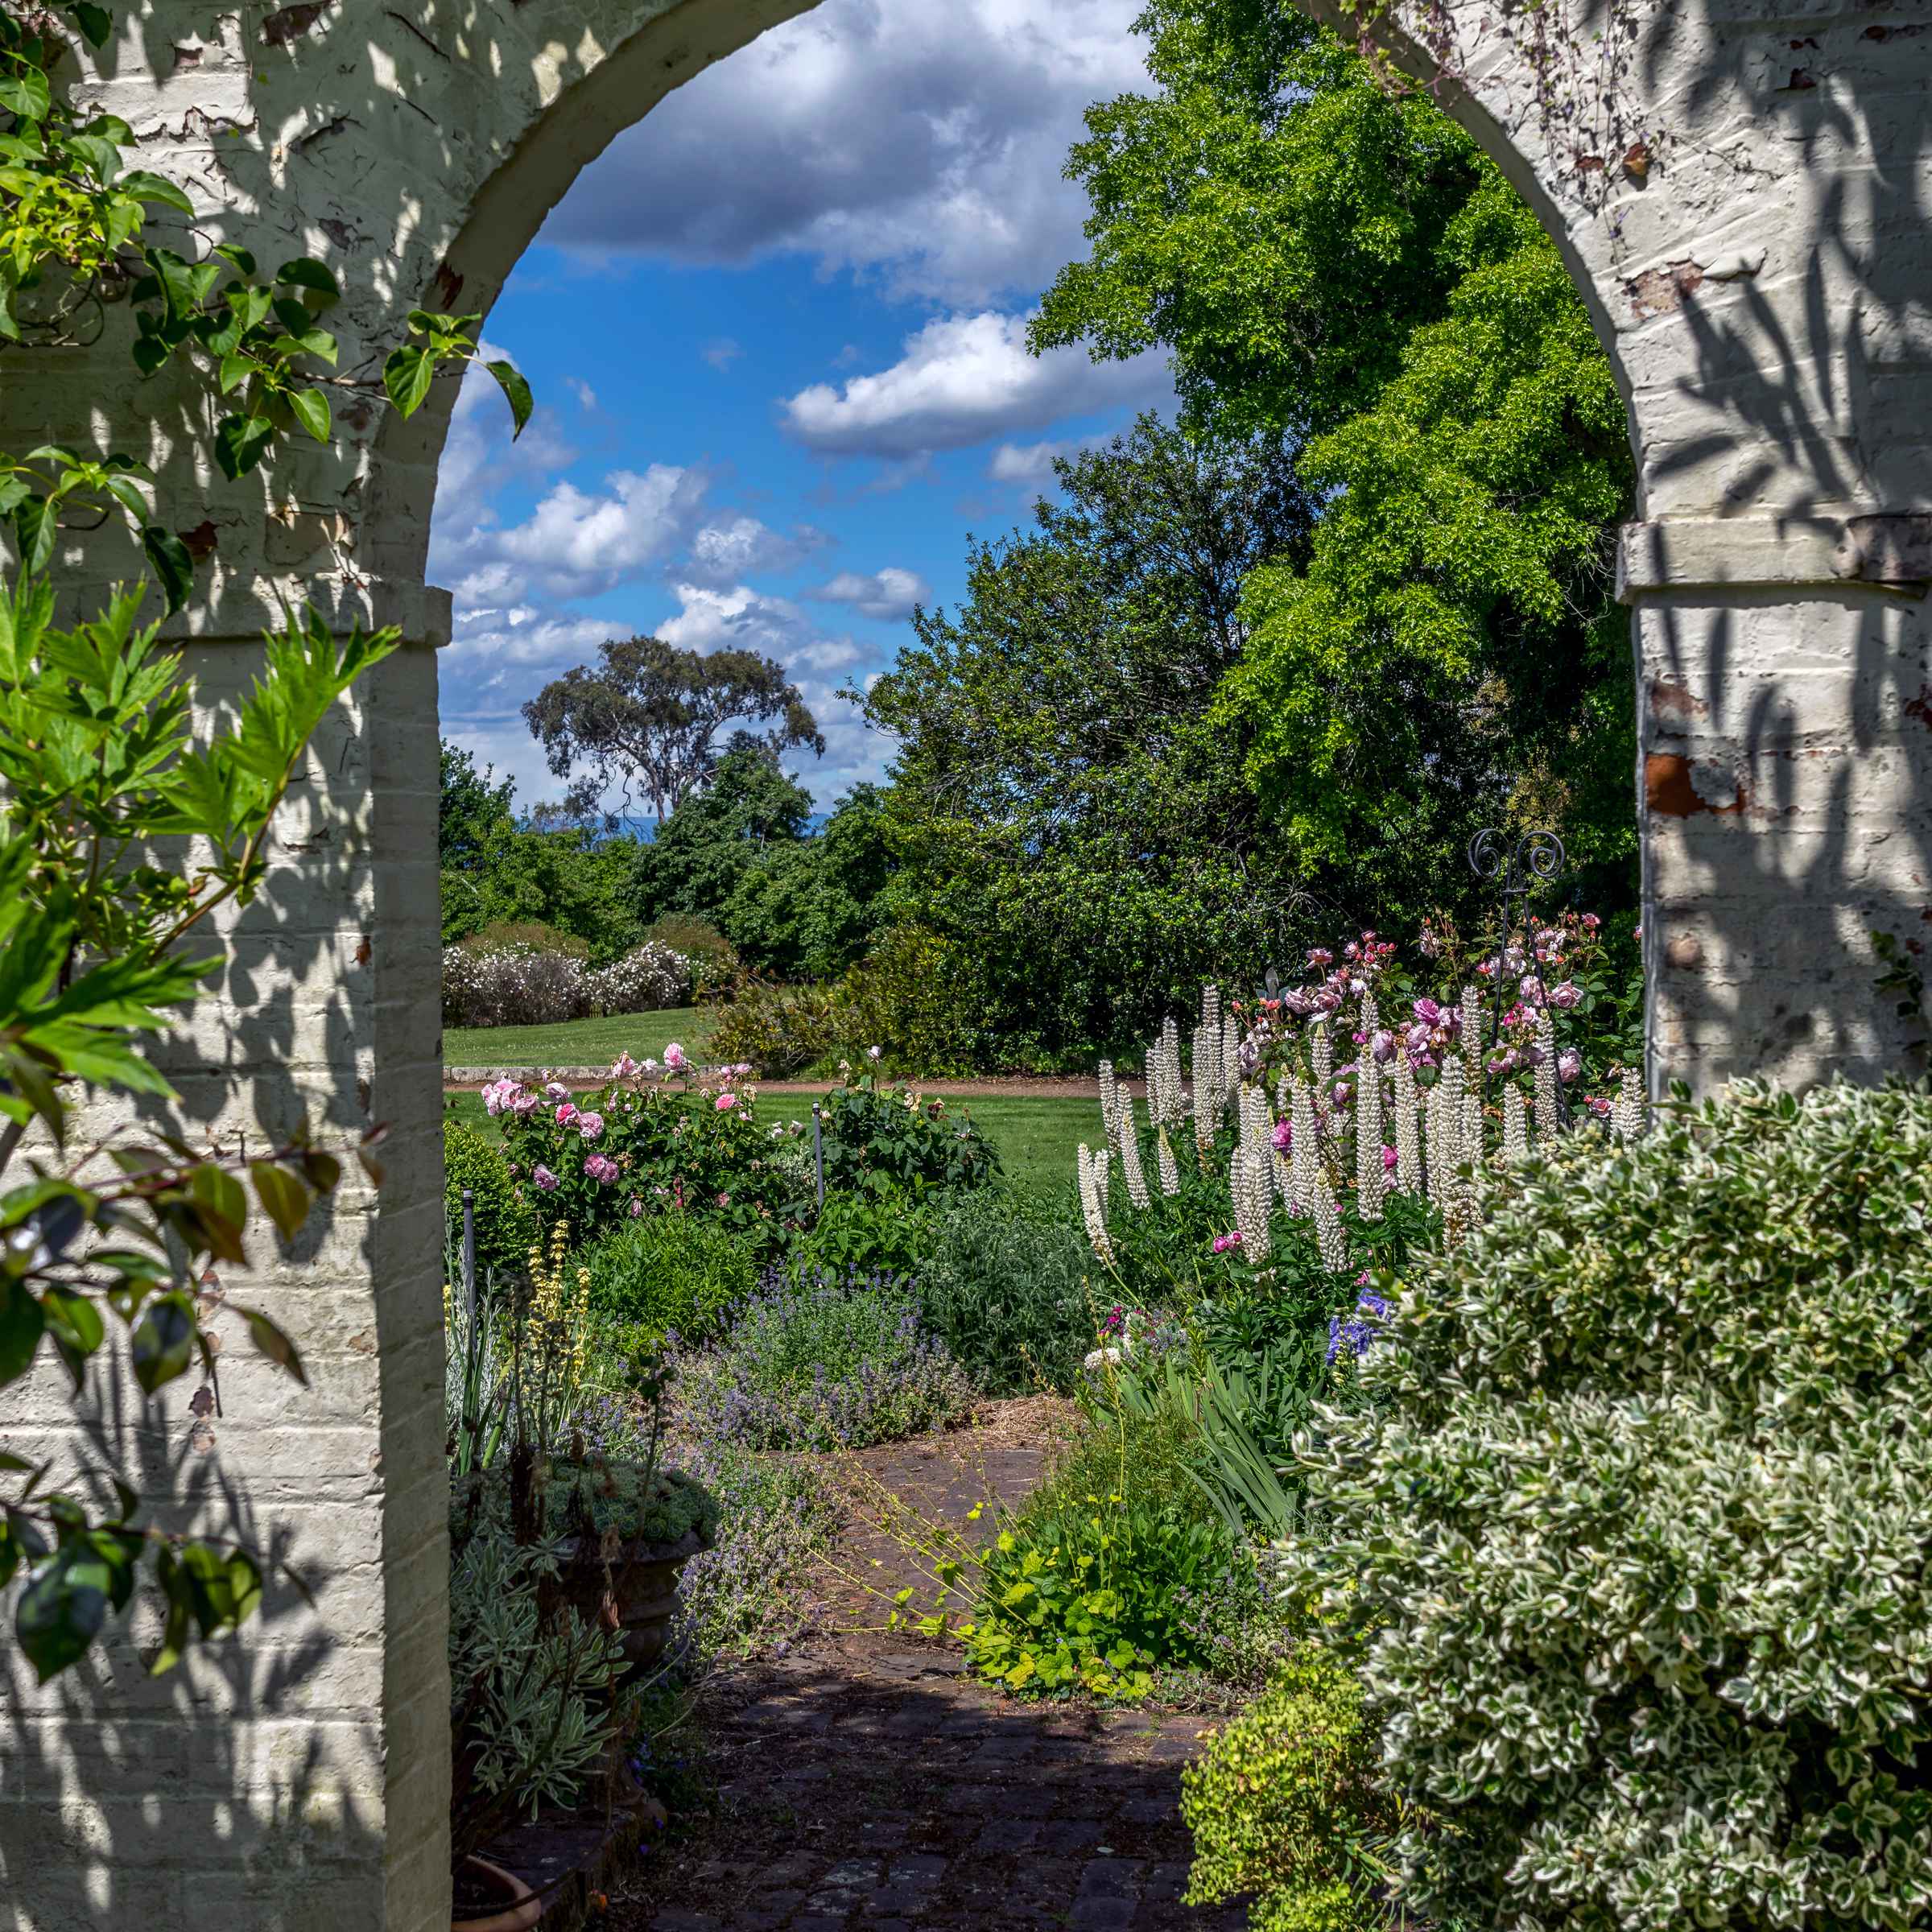 A white brick arch leads to the verandah bed garden and front lawns. White lupins, pink roses and purple catmint feature in the foreground with a holly tree and pin oak in the background. Photo: Rob Burnett.